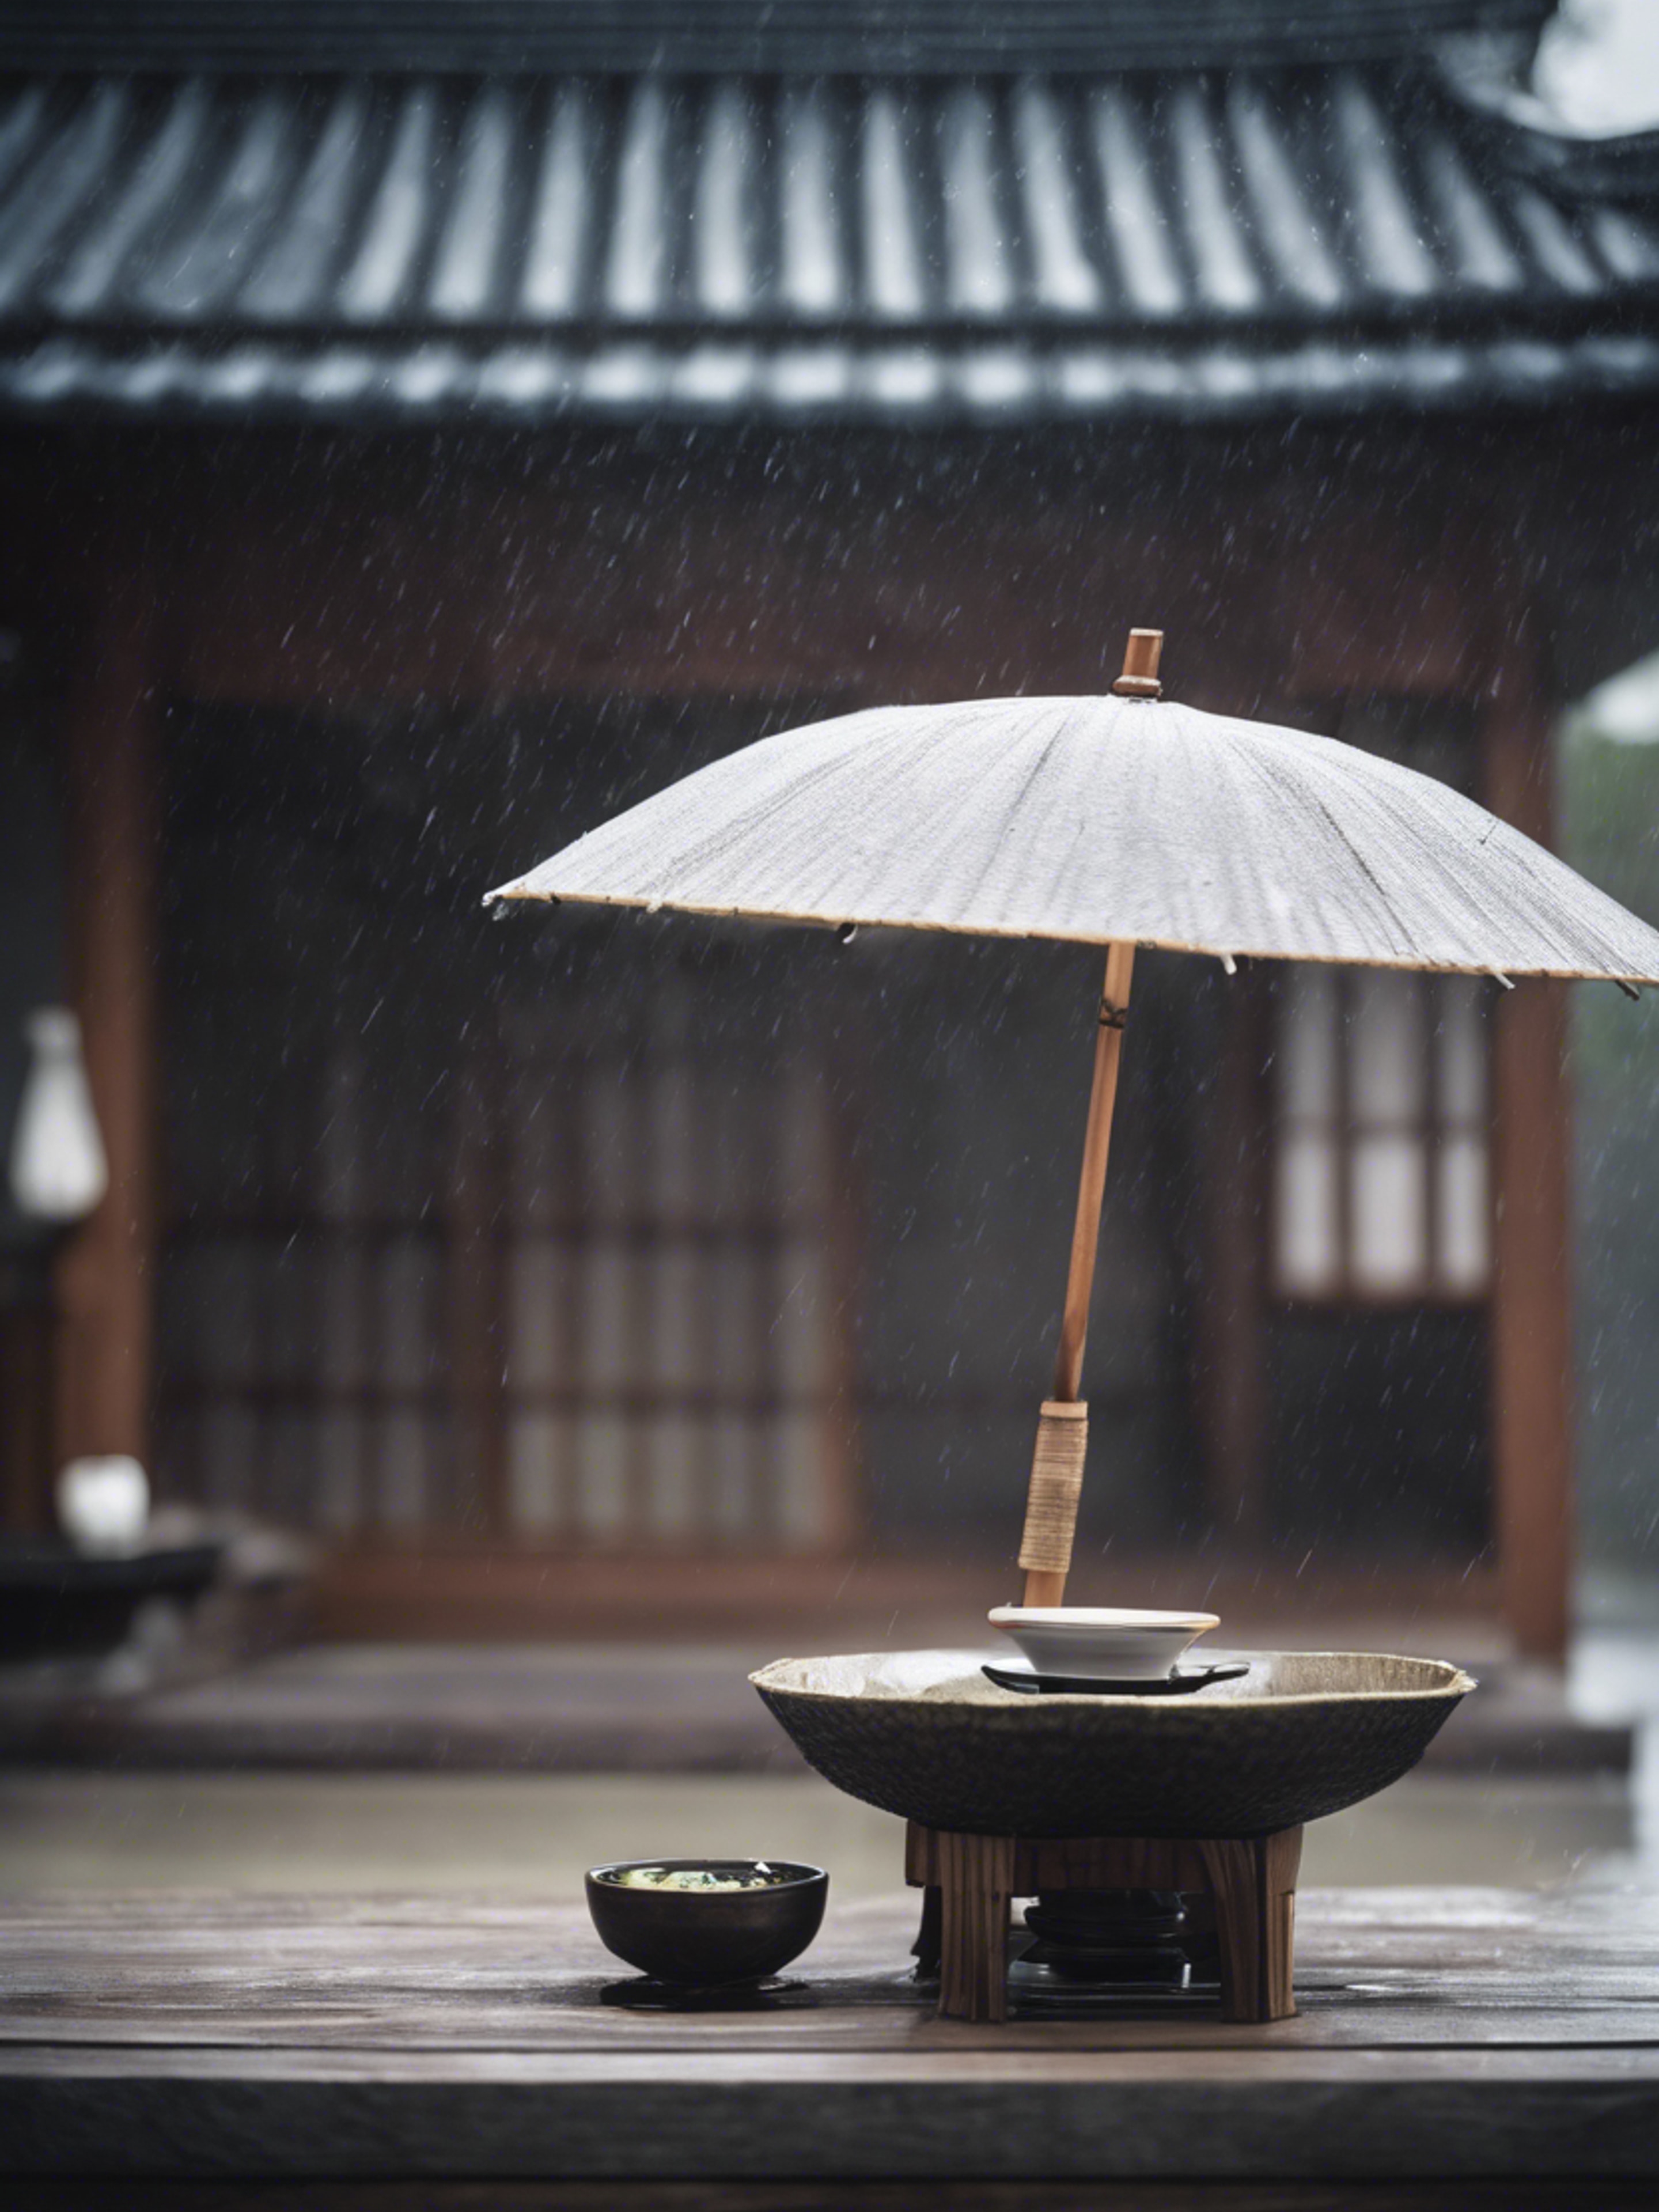 A melancholic depiction of a solo Japanese tea ceremony being performed on a rainy day, by a lone figure under a paper umbrella.壁紙[f40b8b46d18548d9b63d]